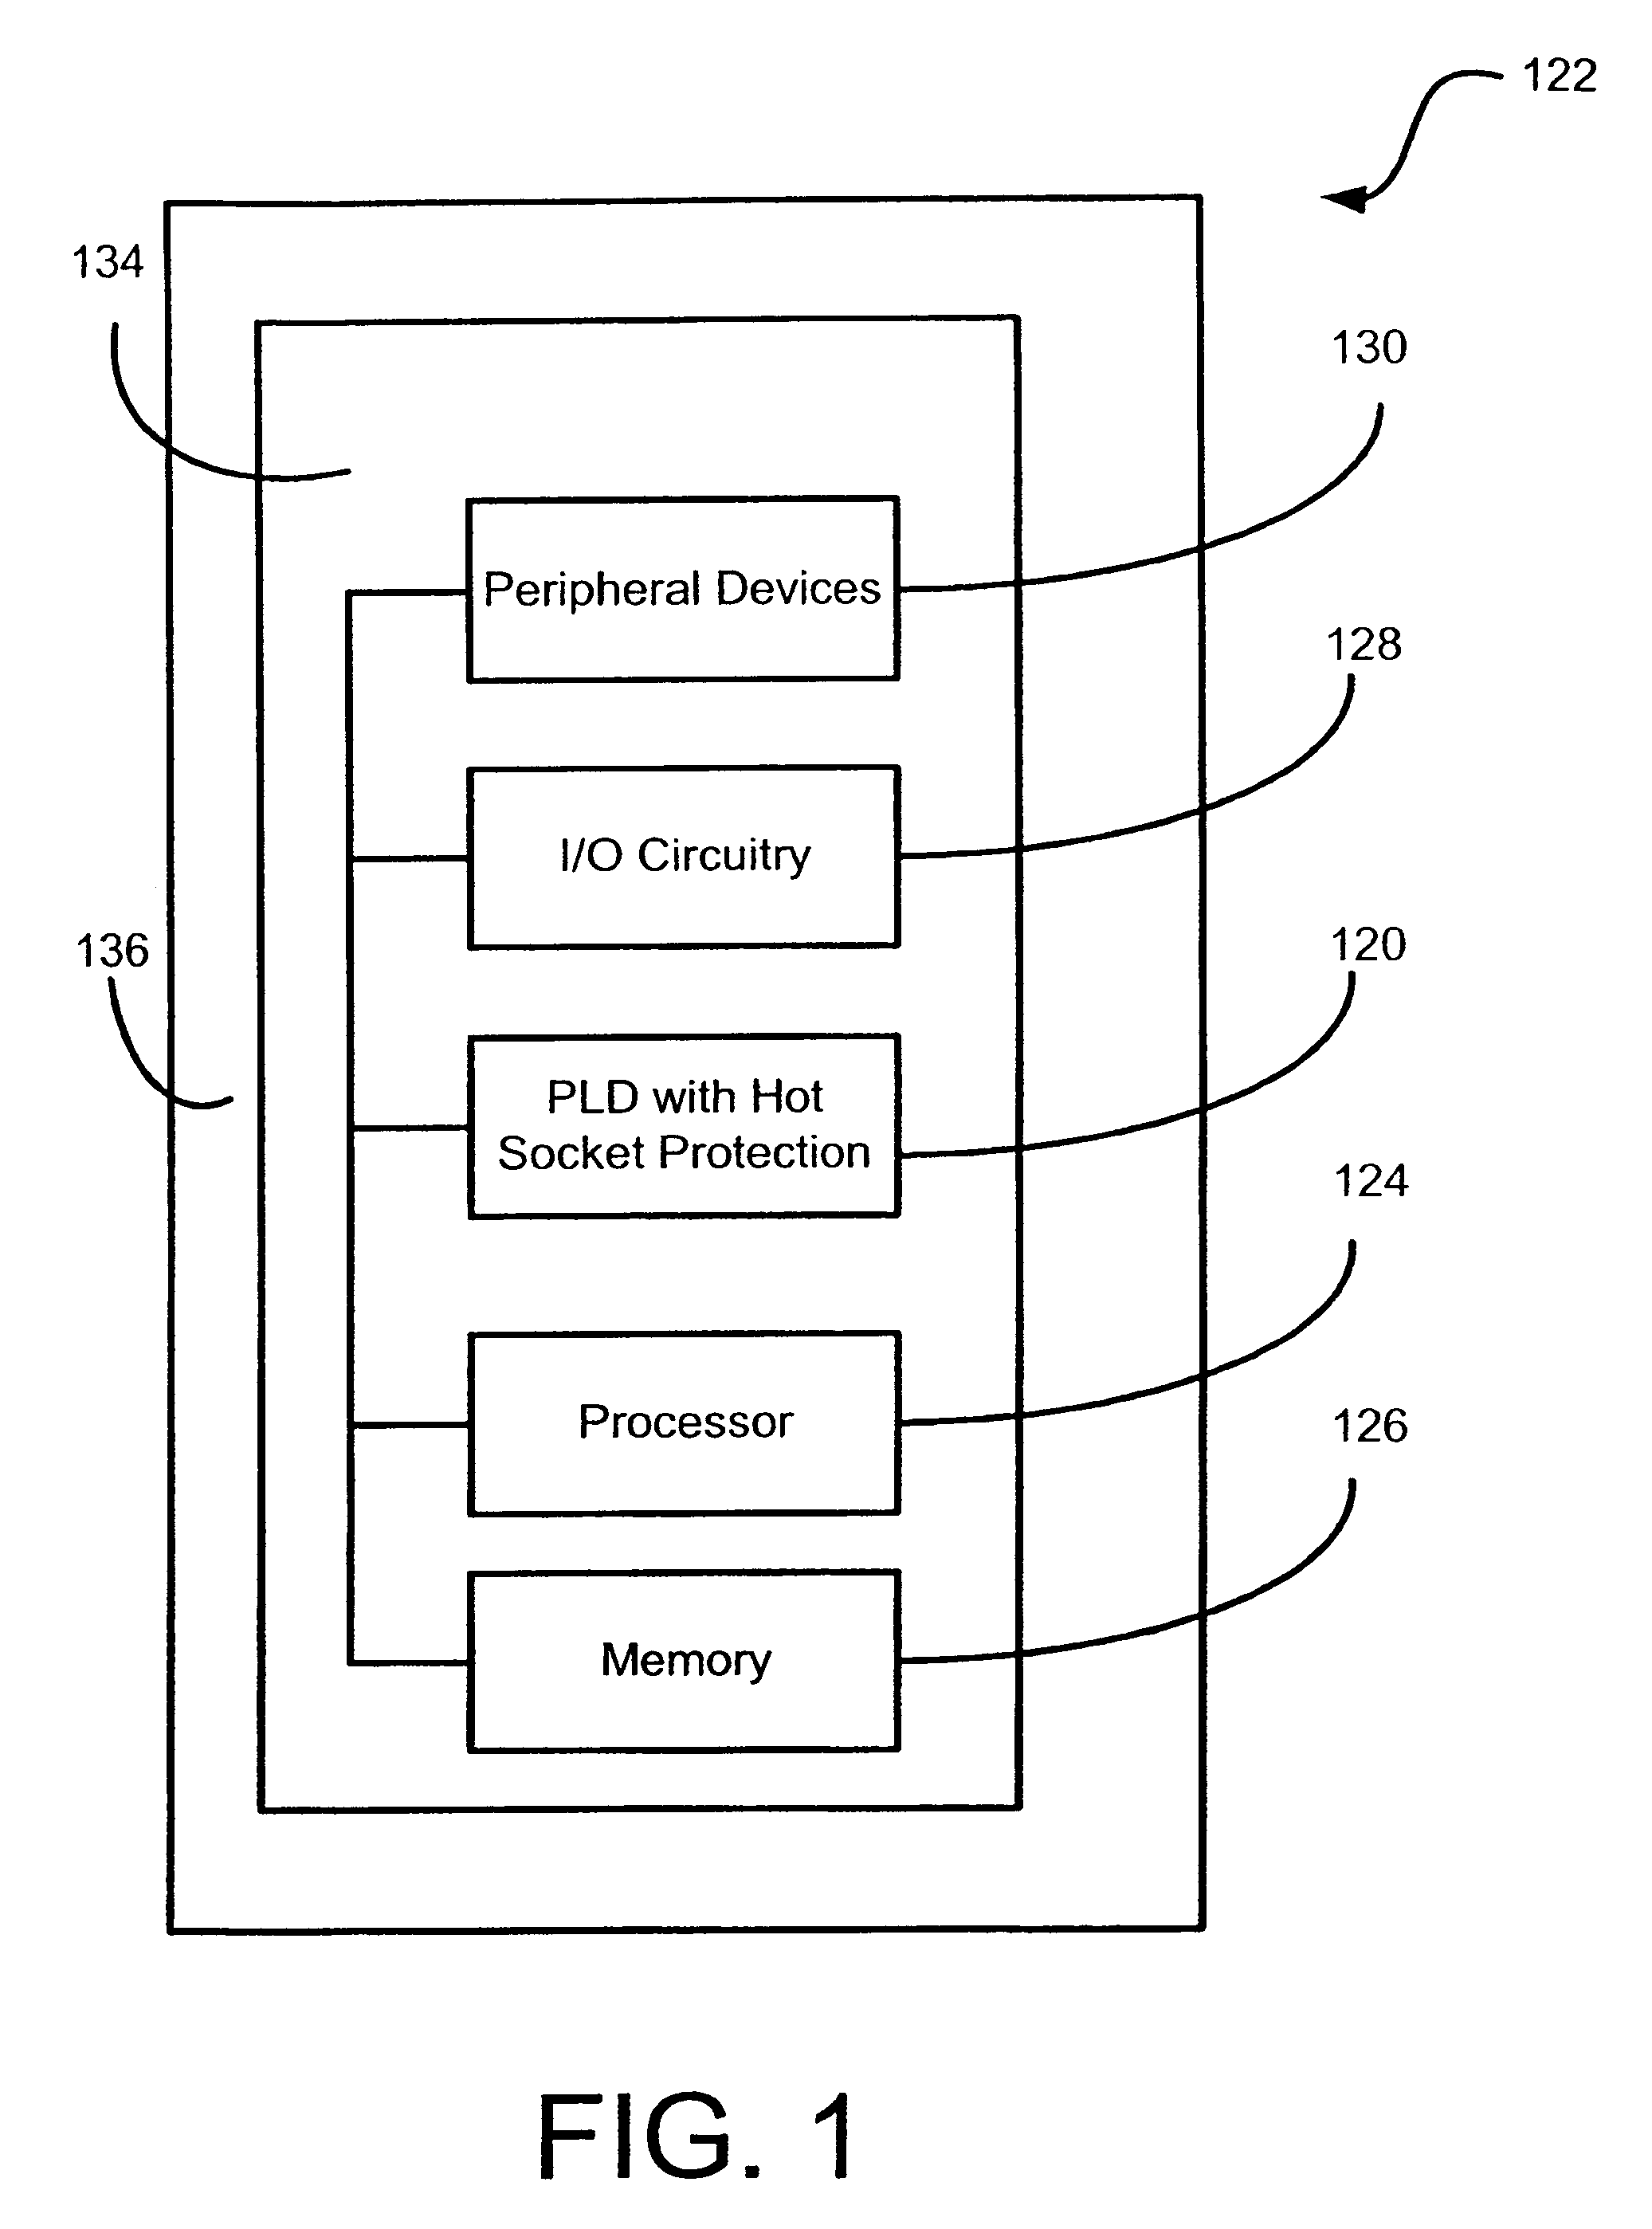 Method and apparatus for protecting a circuit during a hot socket condition